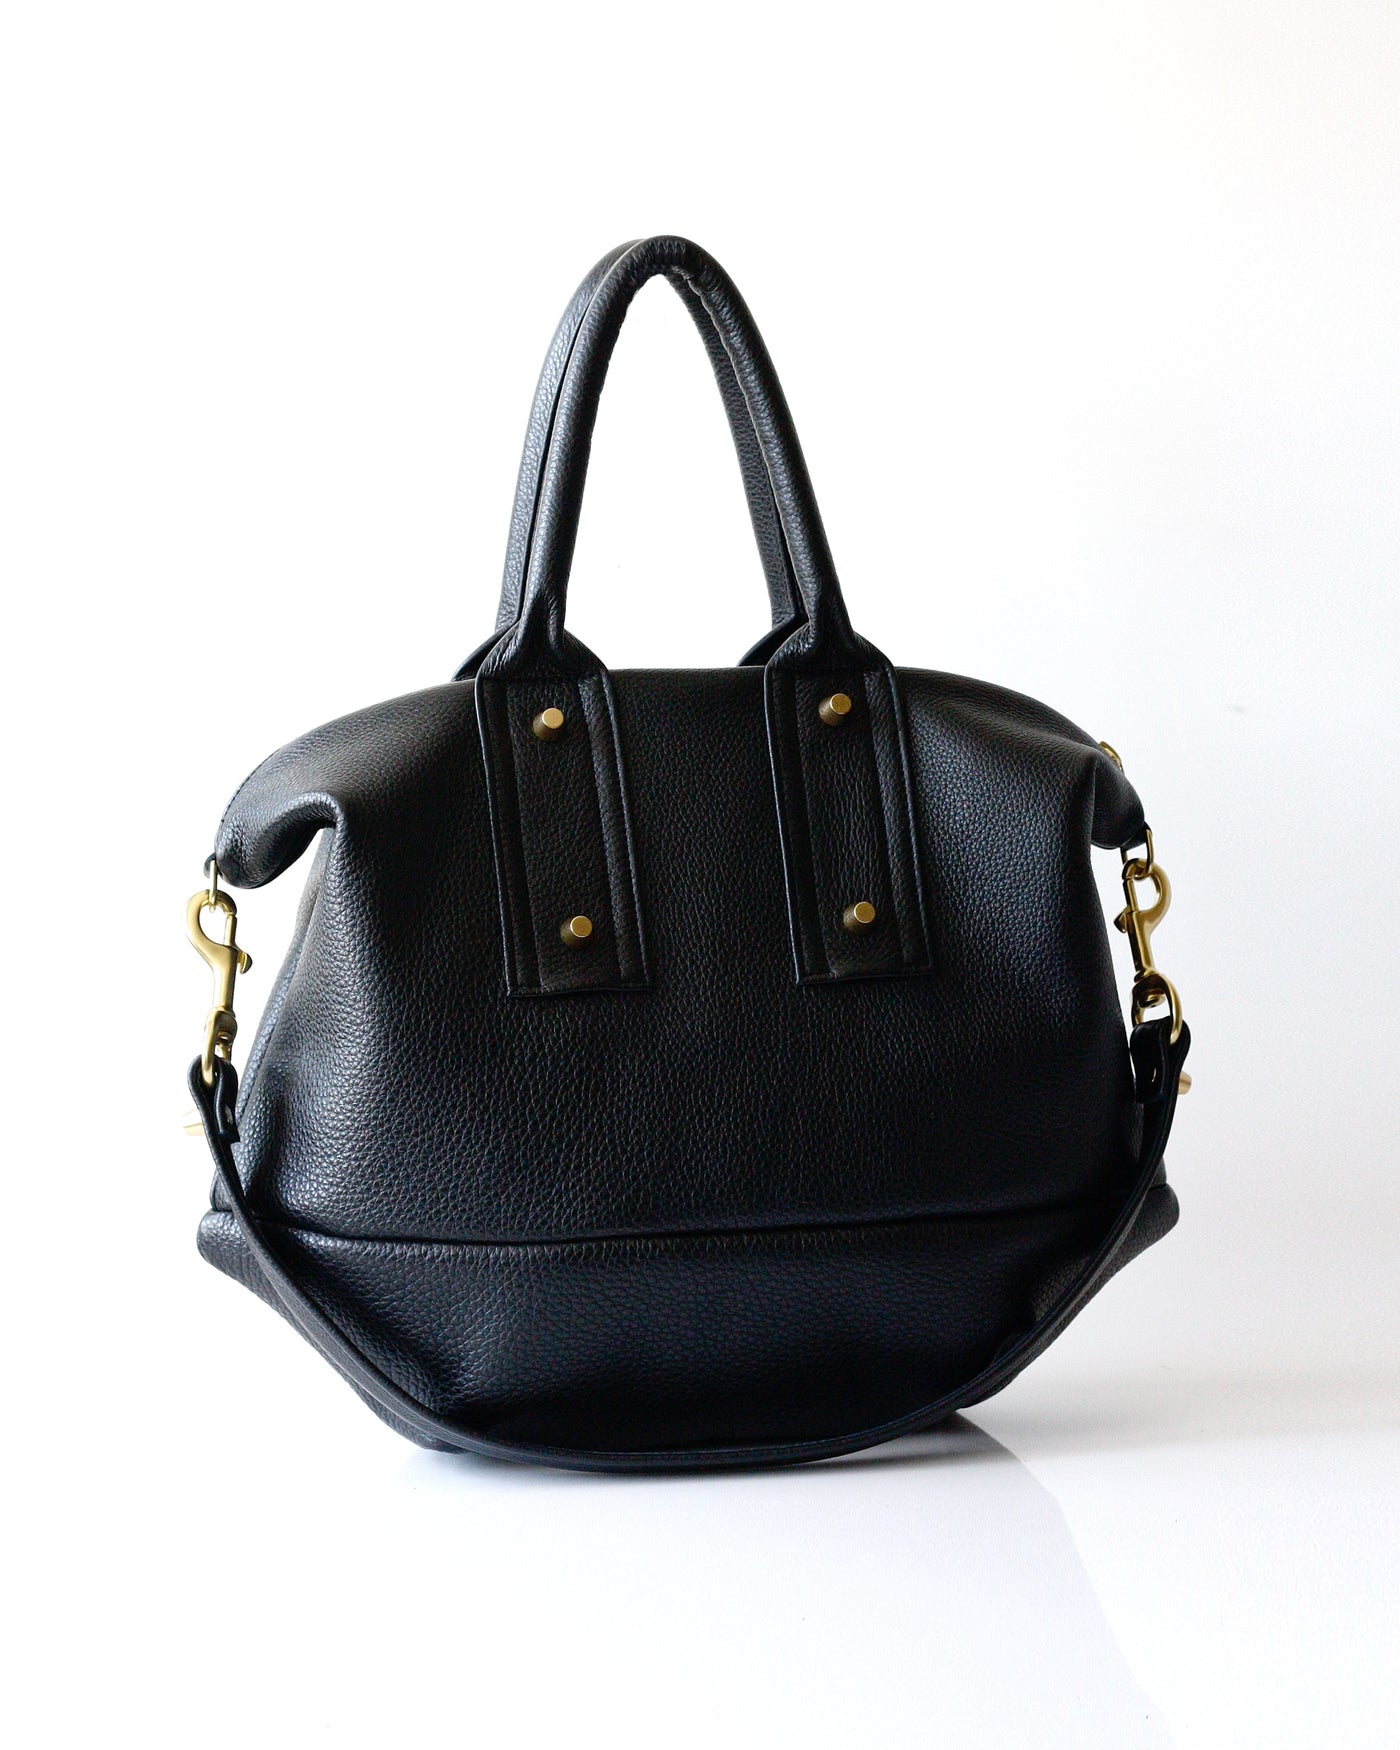 Vanda - Opelle bag Permanent Collection - Opelle leather handbag handcrafted leather bag toronto Canada